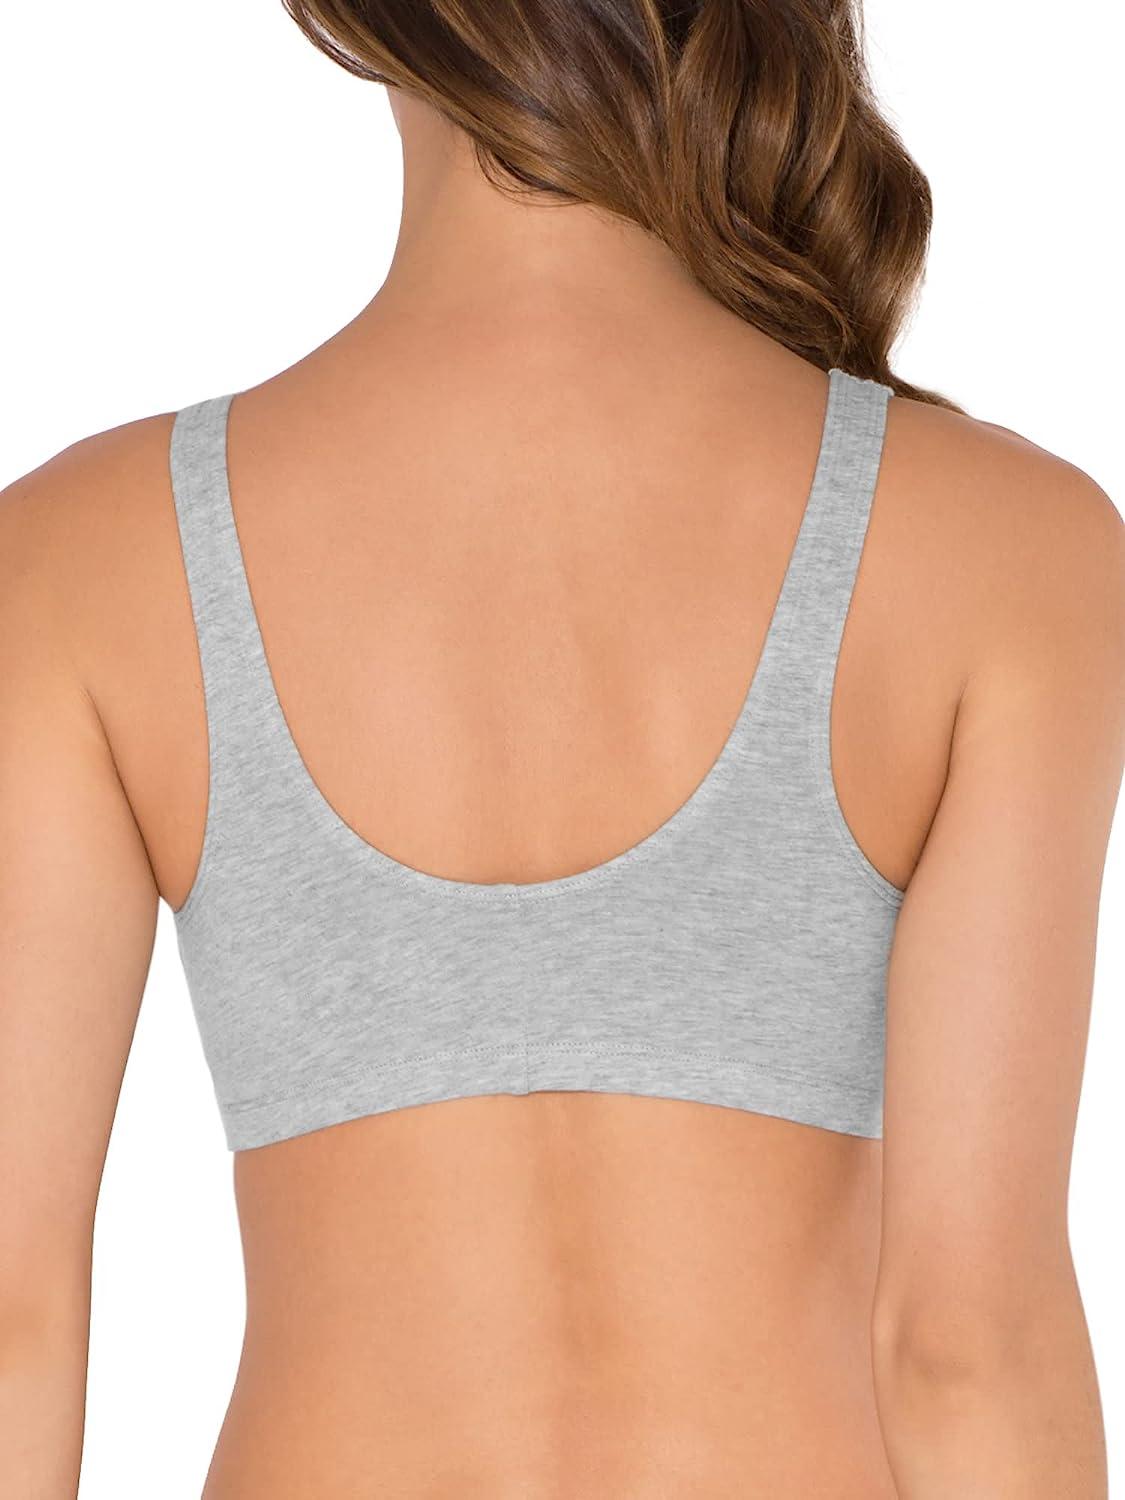 Fruit of the Loom Women's Front Closure Cotton Bra 3 Black/White/Heather  Grey 3-pack 38